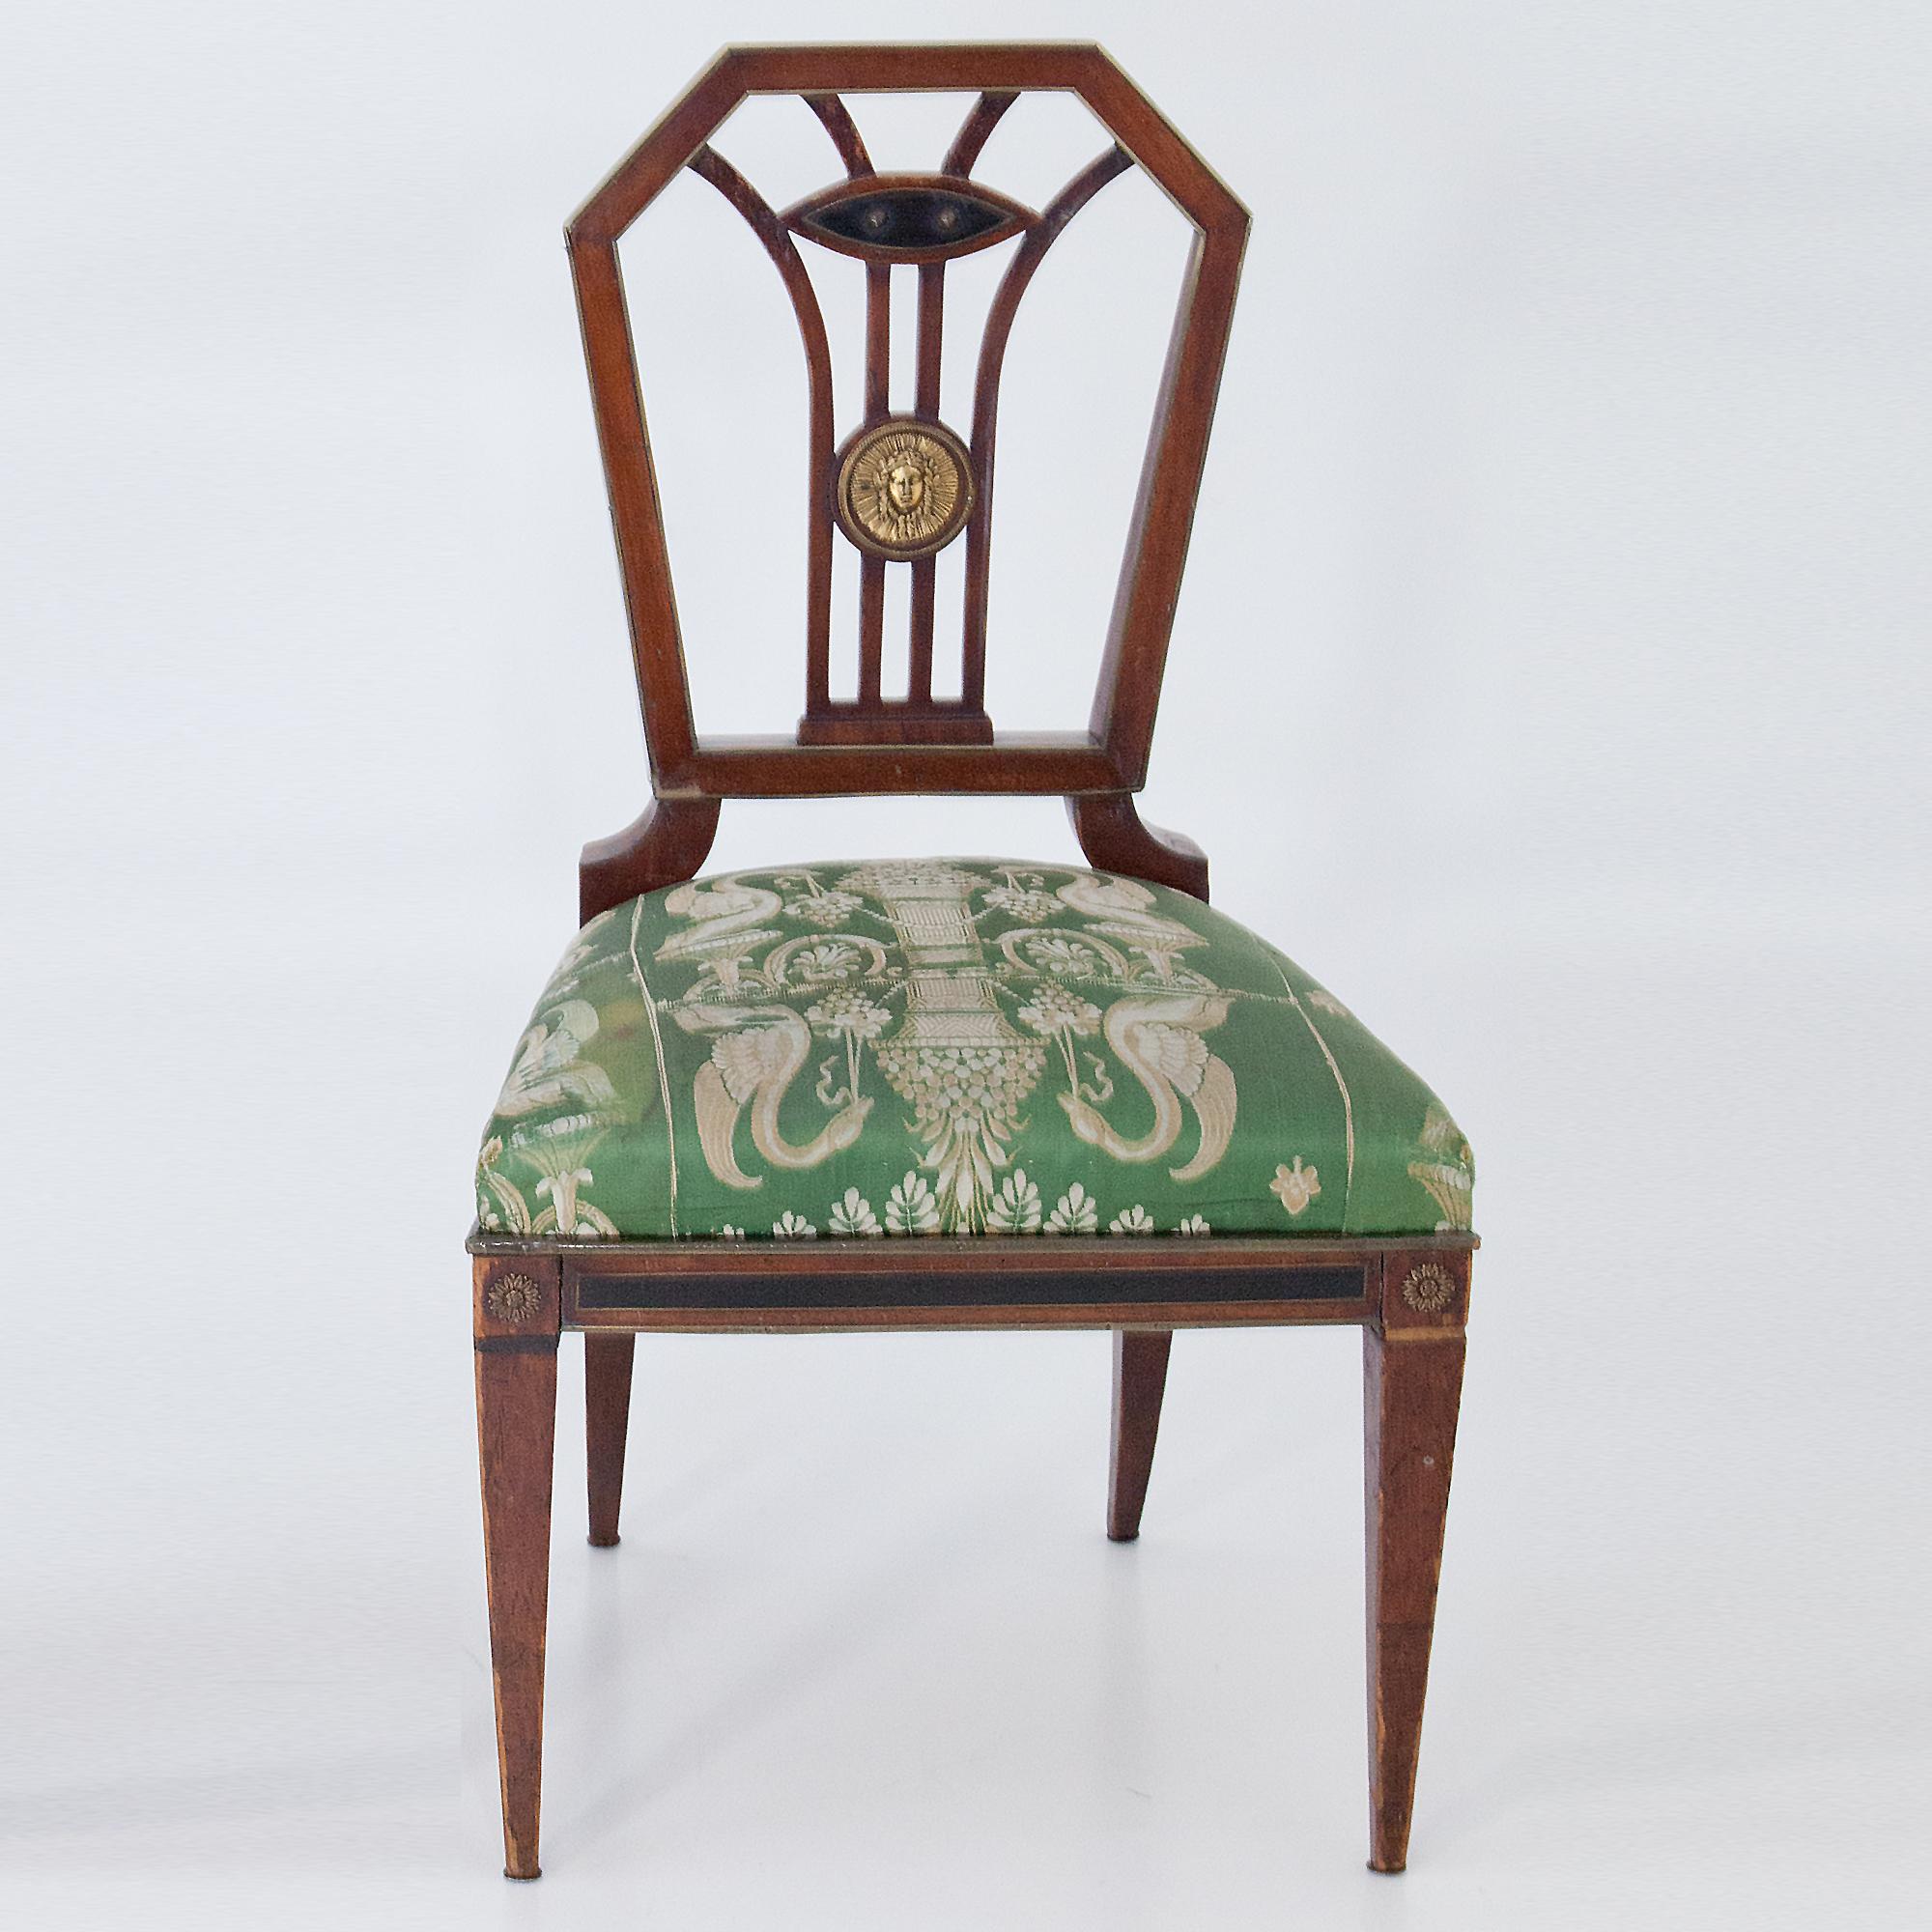 Austrian Neoclassical Chairs, probably G. A. Pohle, Vienna, circa 1805-1810